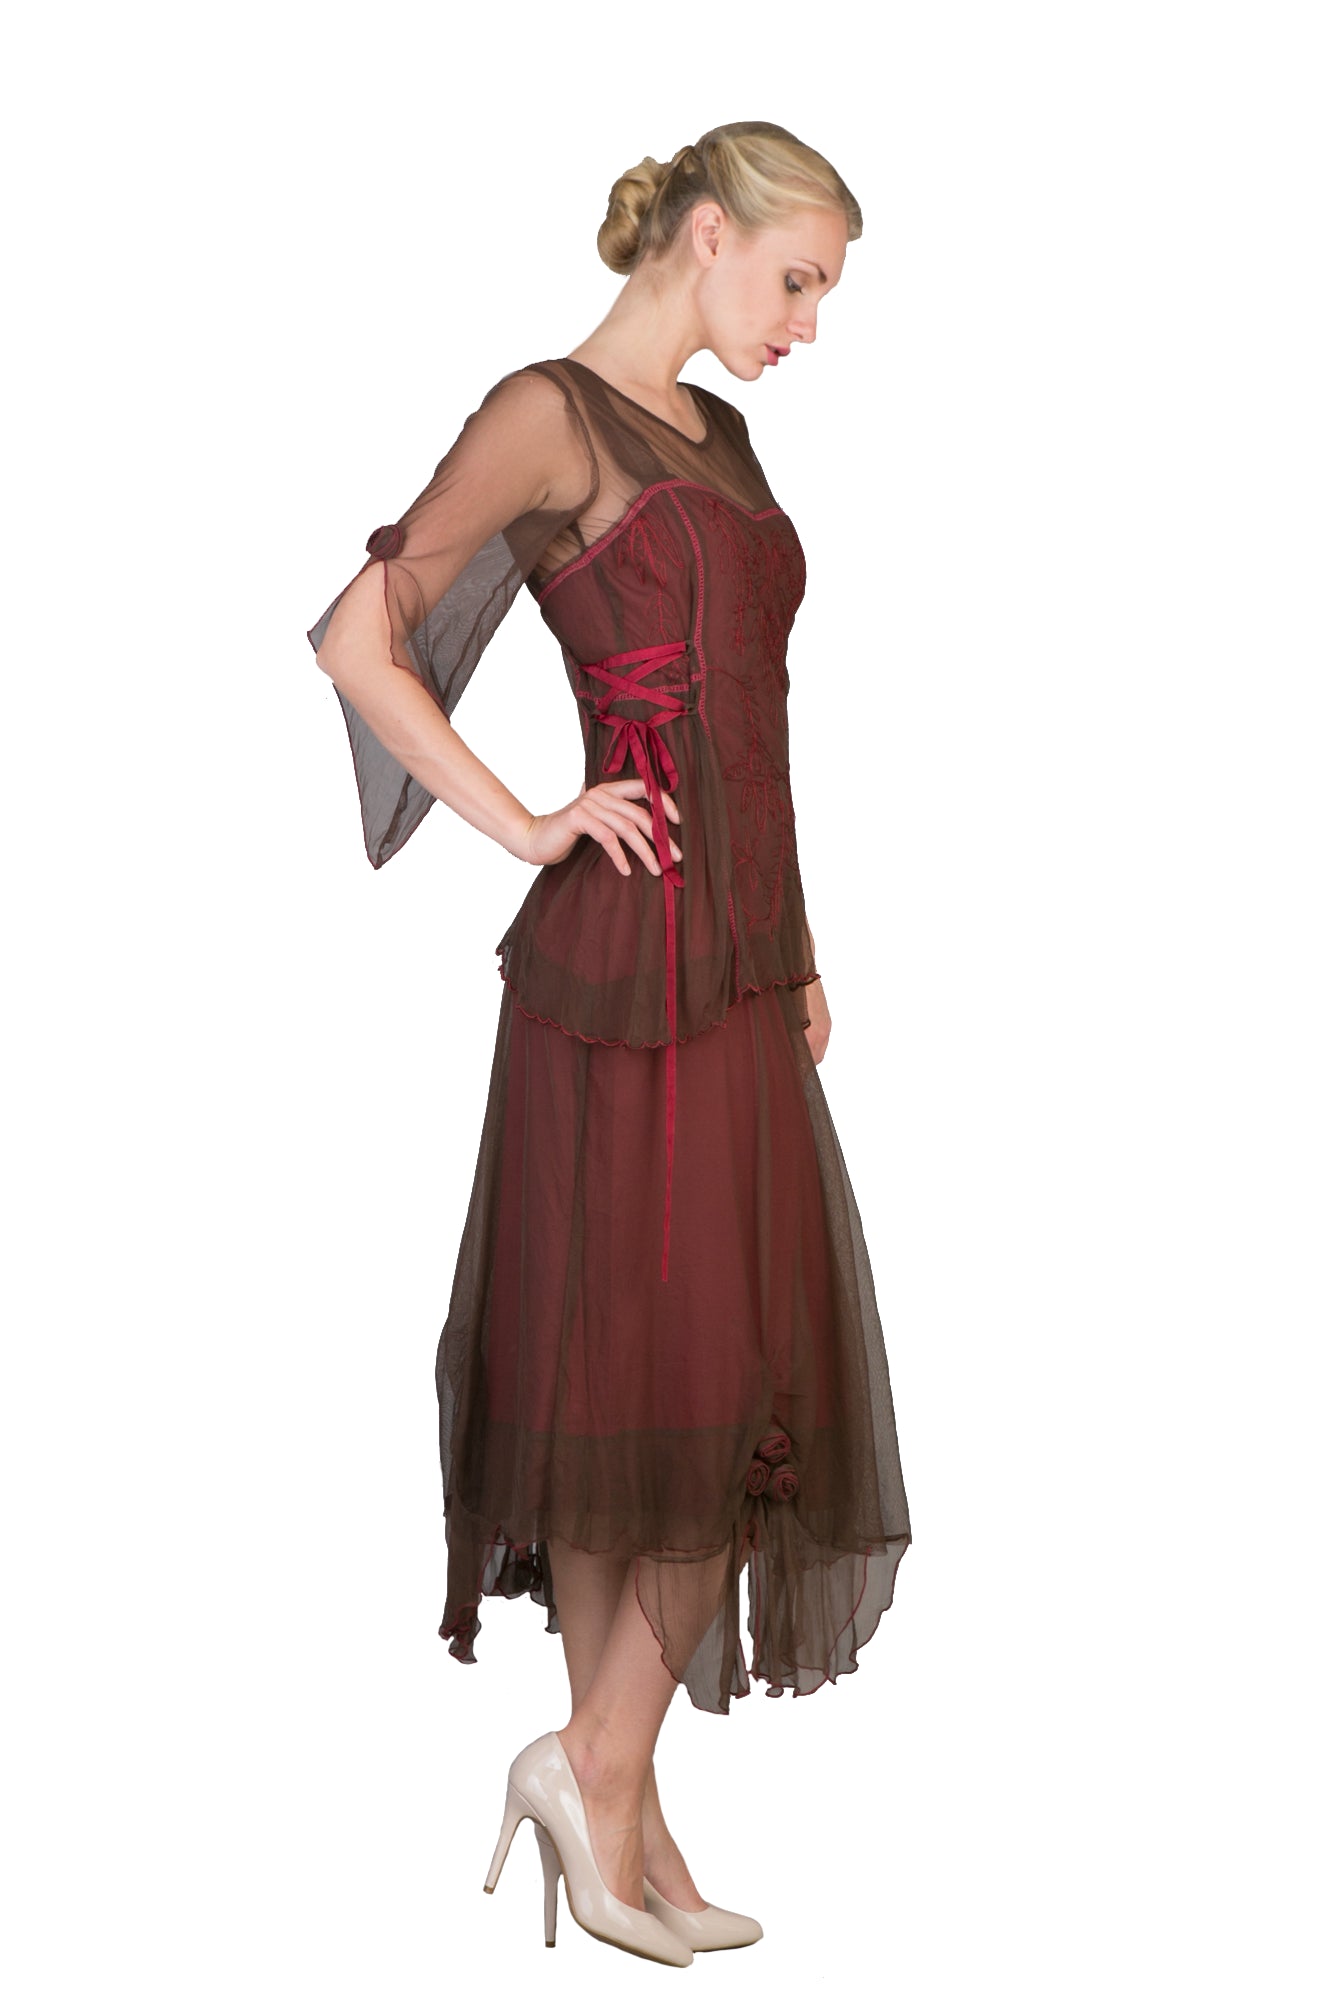 Asymmetrical Chiffon Rosettes Party Dress in Chocolate-Raspberry by Nataya - SOLD OUT